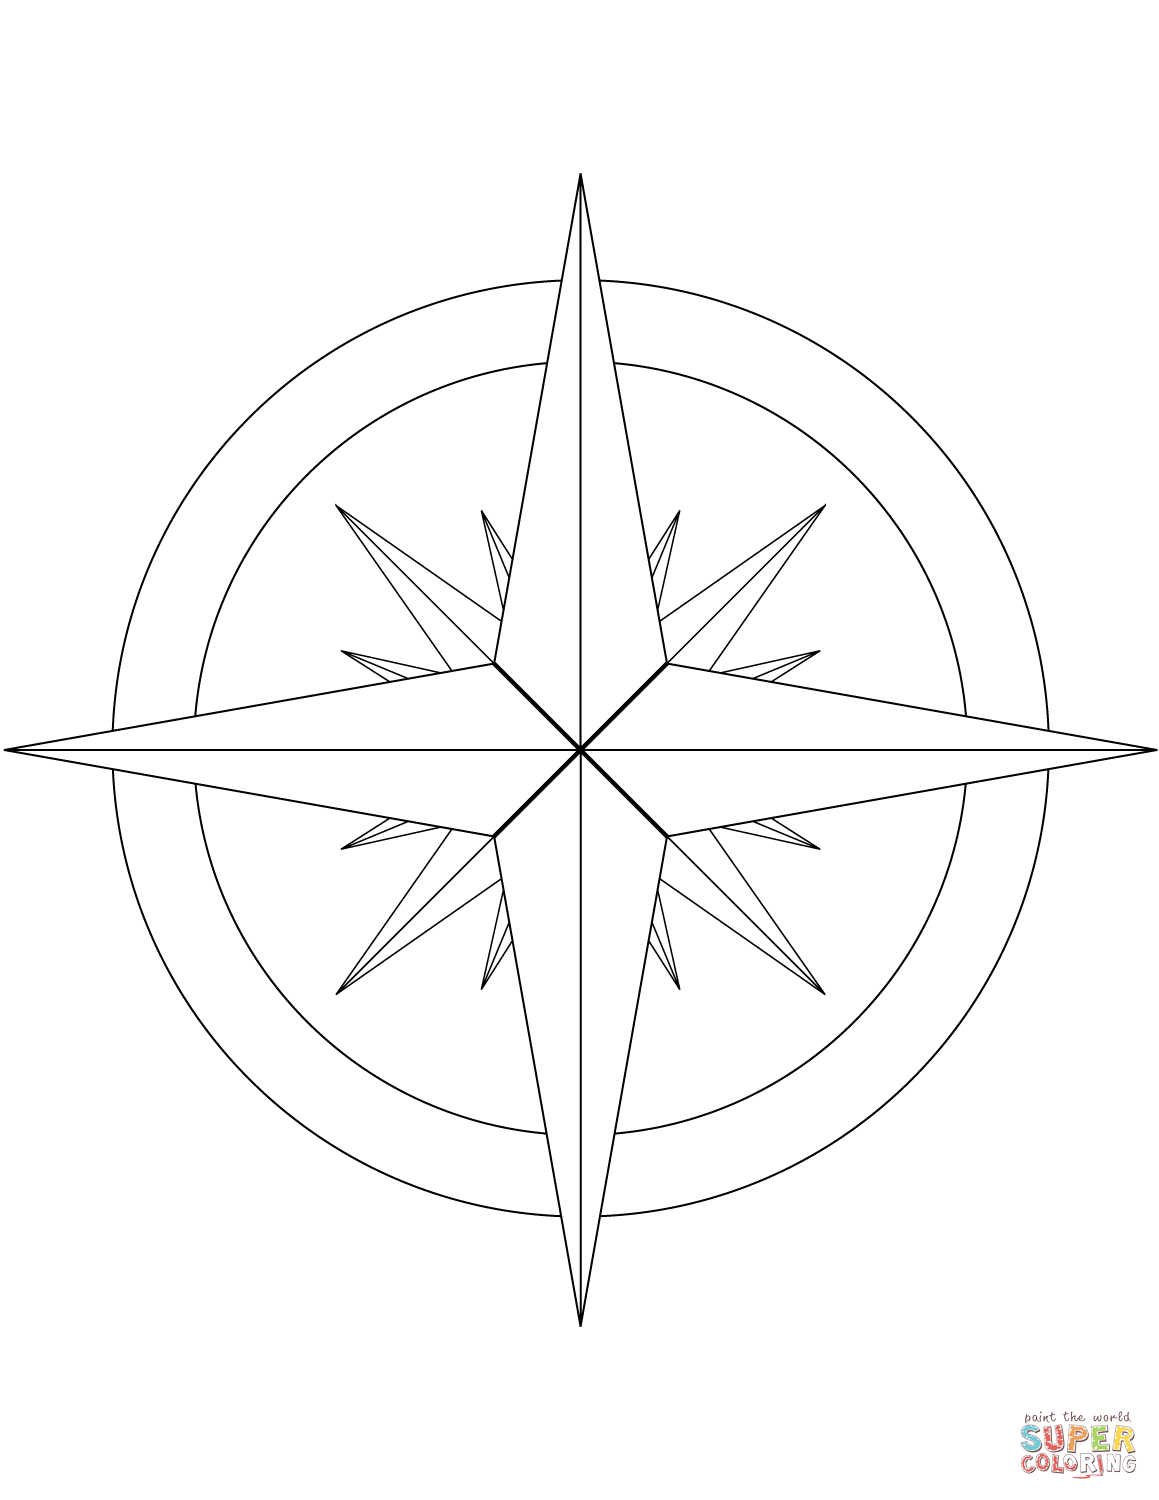 16 Point Compass Rose Coloring Page Free Printable Pages Inside. 